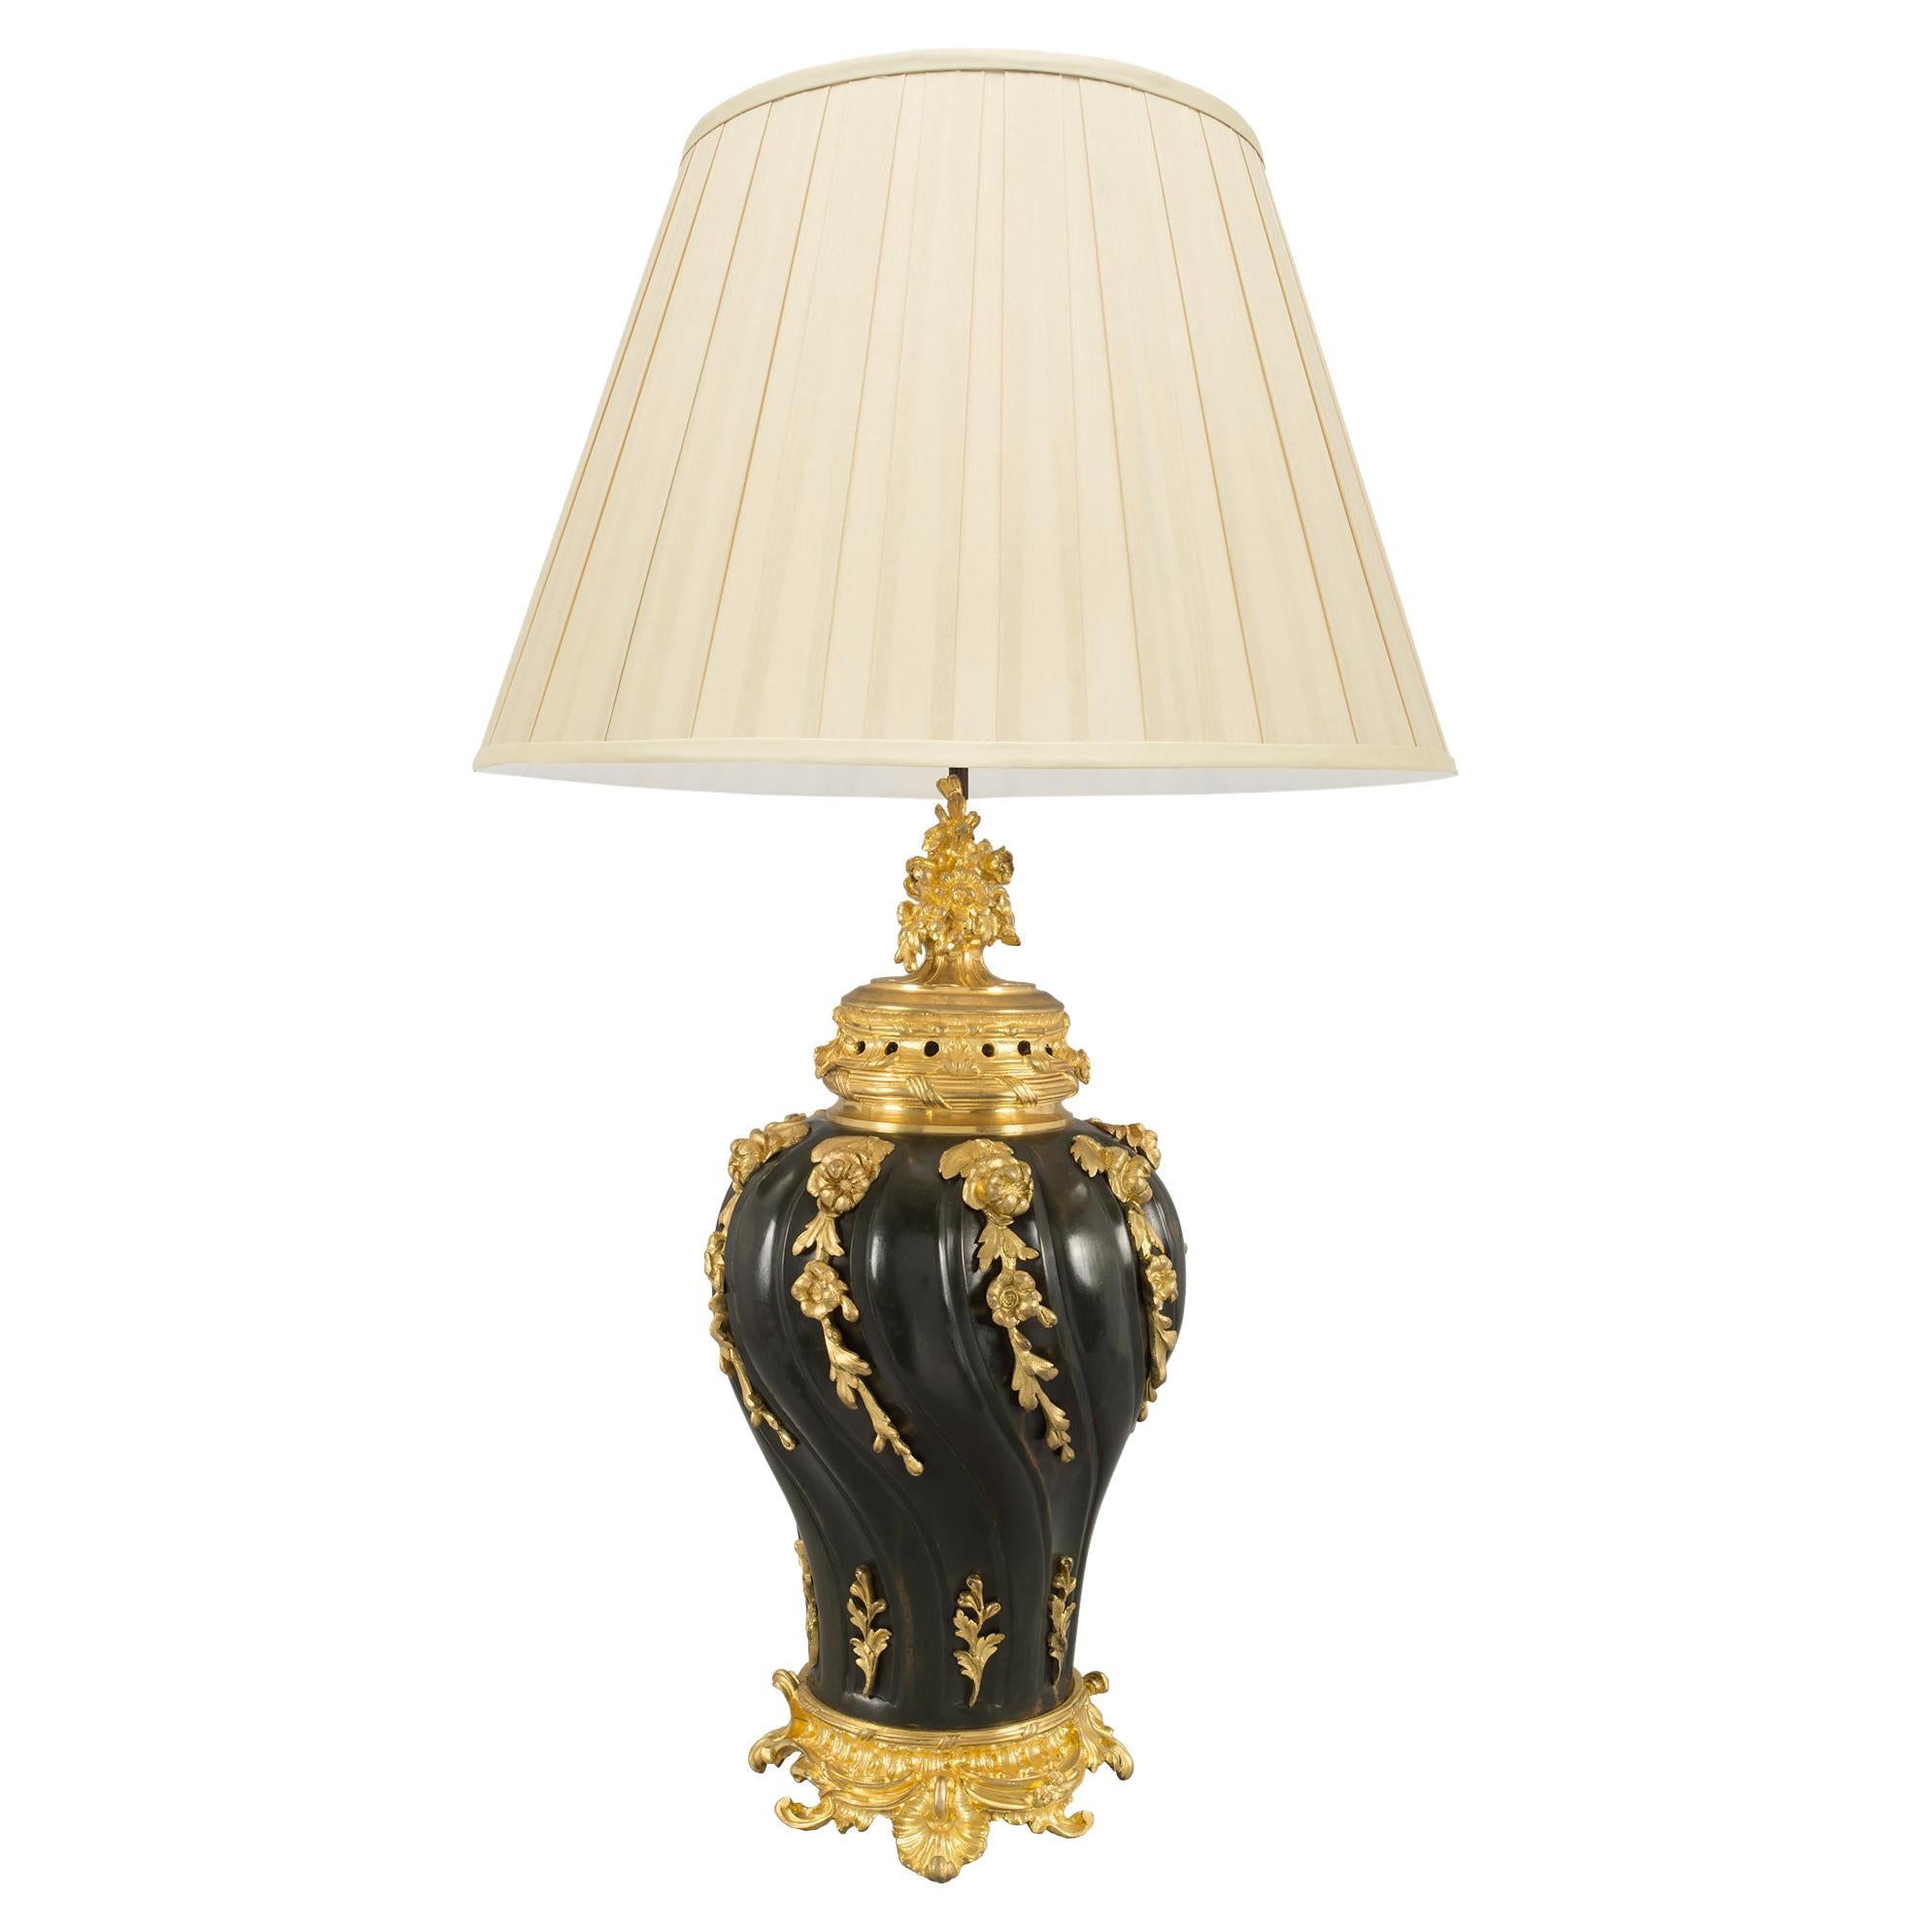 French 19th Century Louis XV Style Patinated Bronze and Ormolu Lamp For Sale